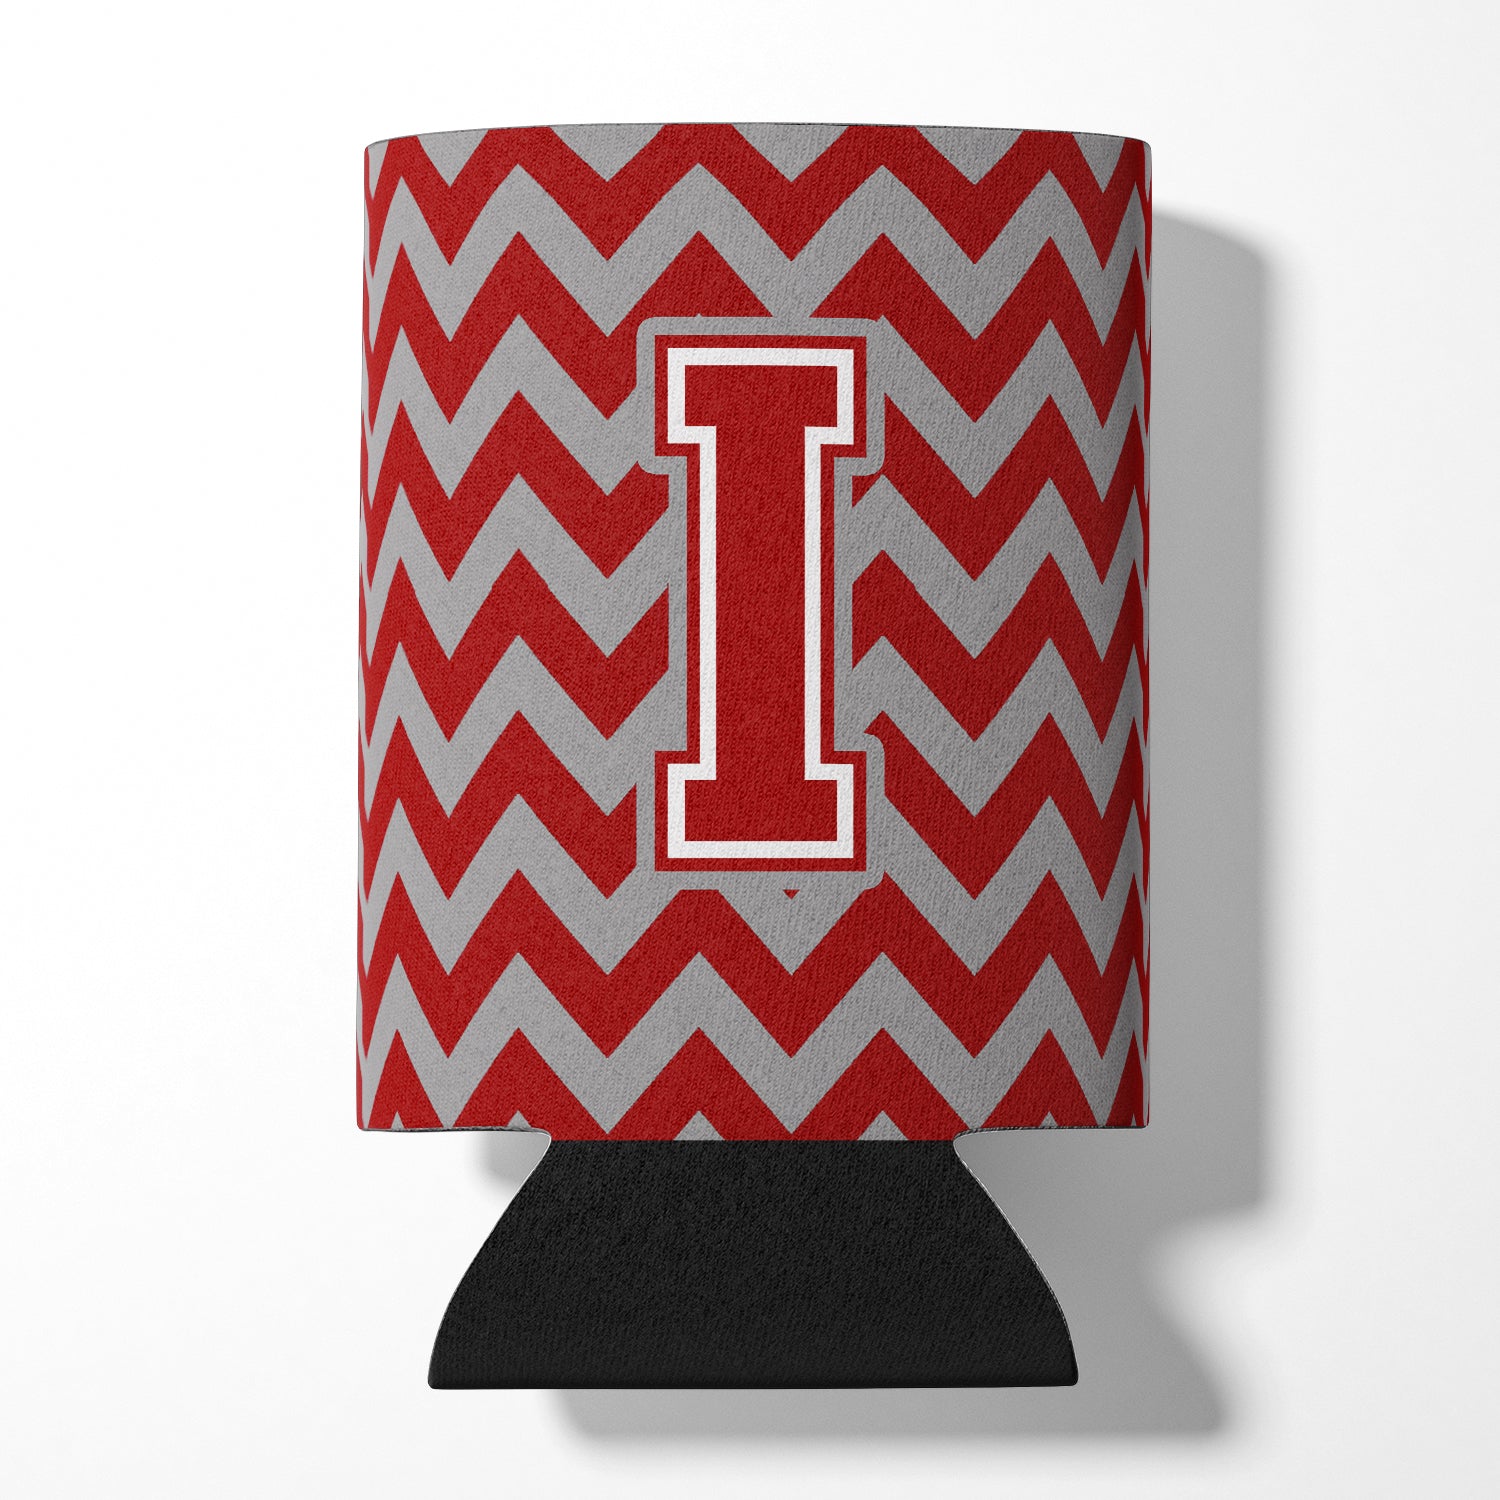 Letter I Chevron Maroon and White Can or Bottle Hugger CJ1049-ICC